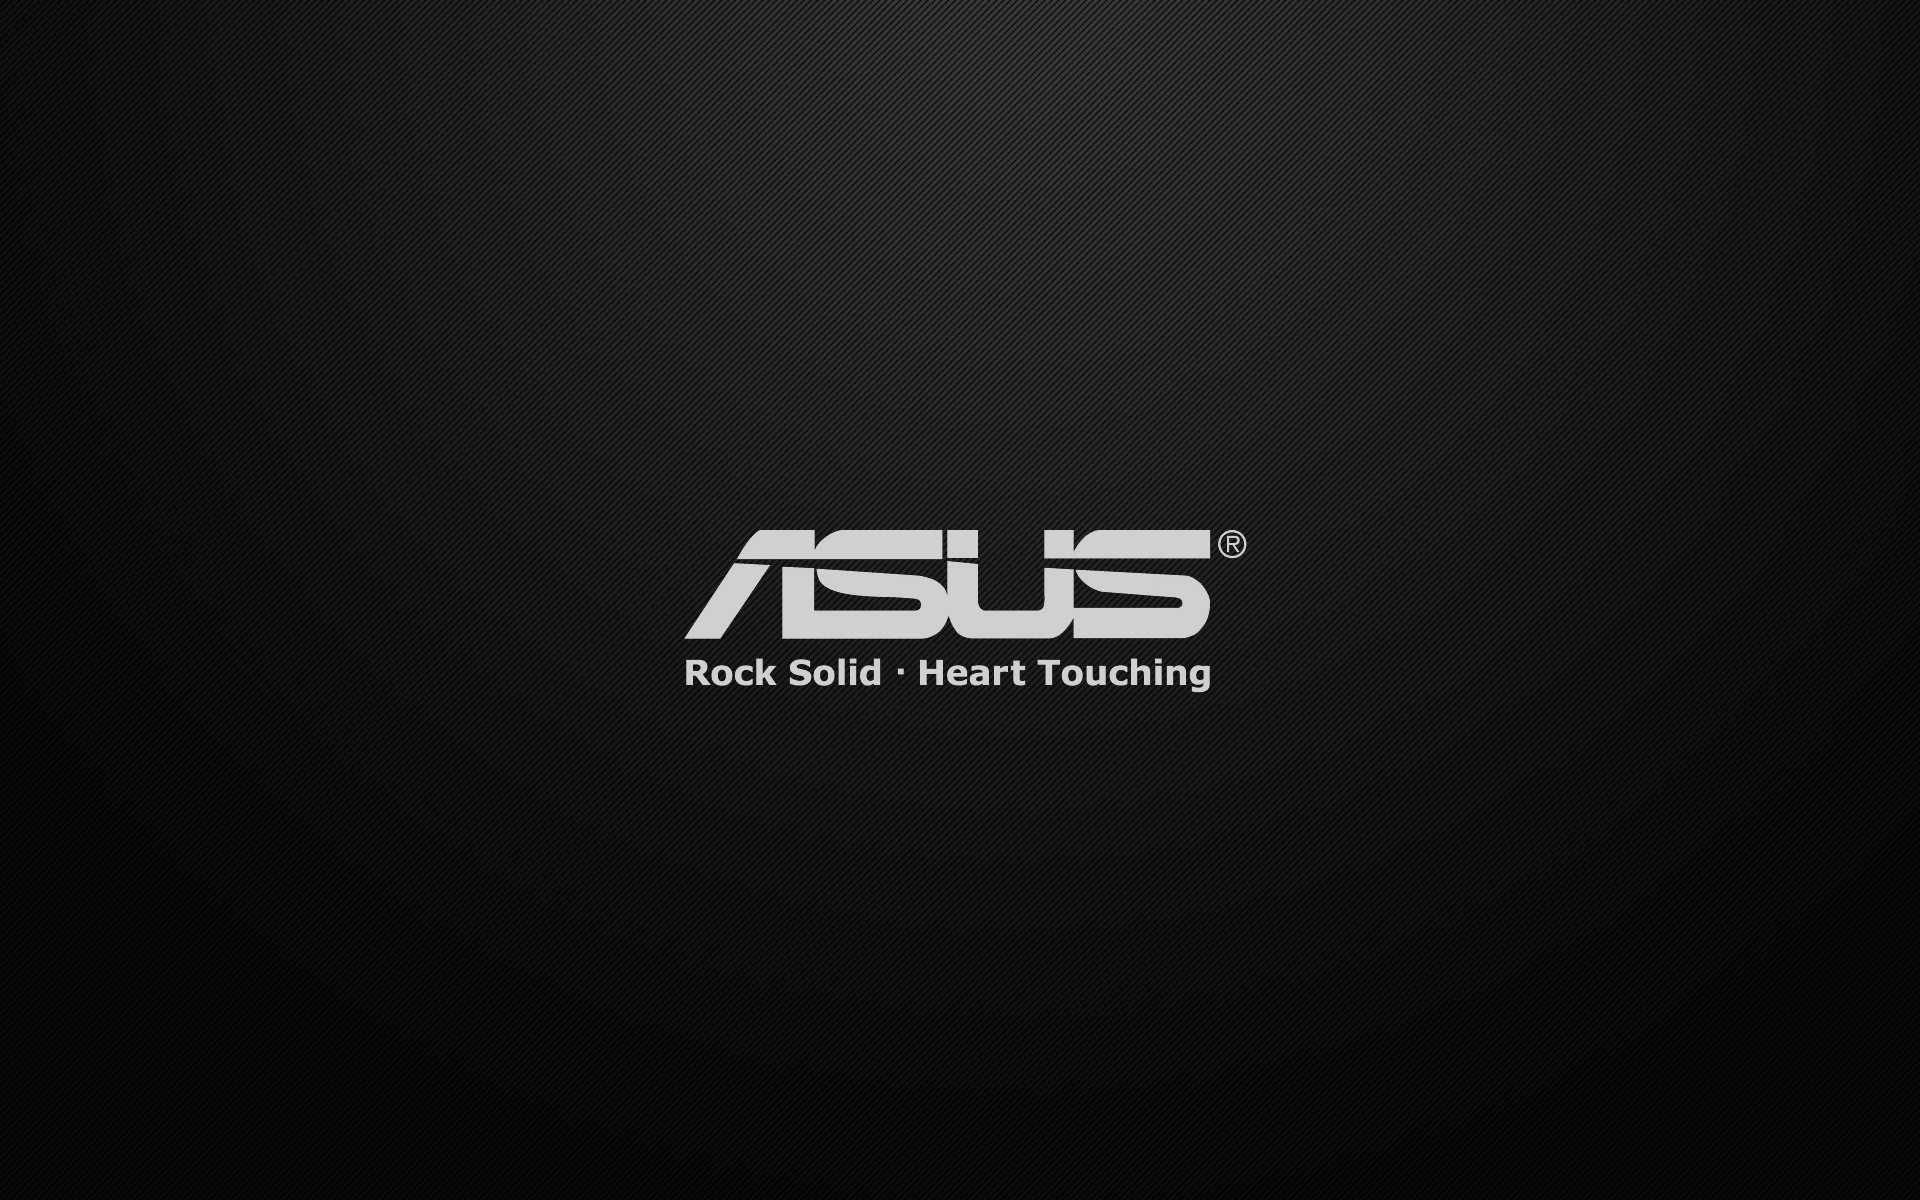 Asus hd papers and backgrounds